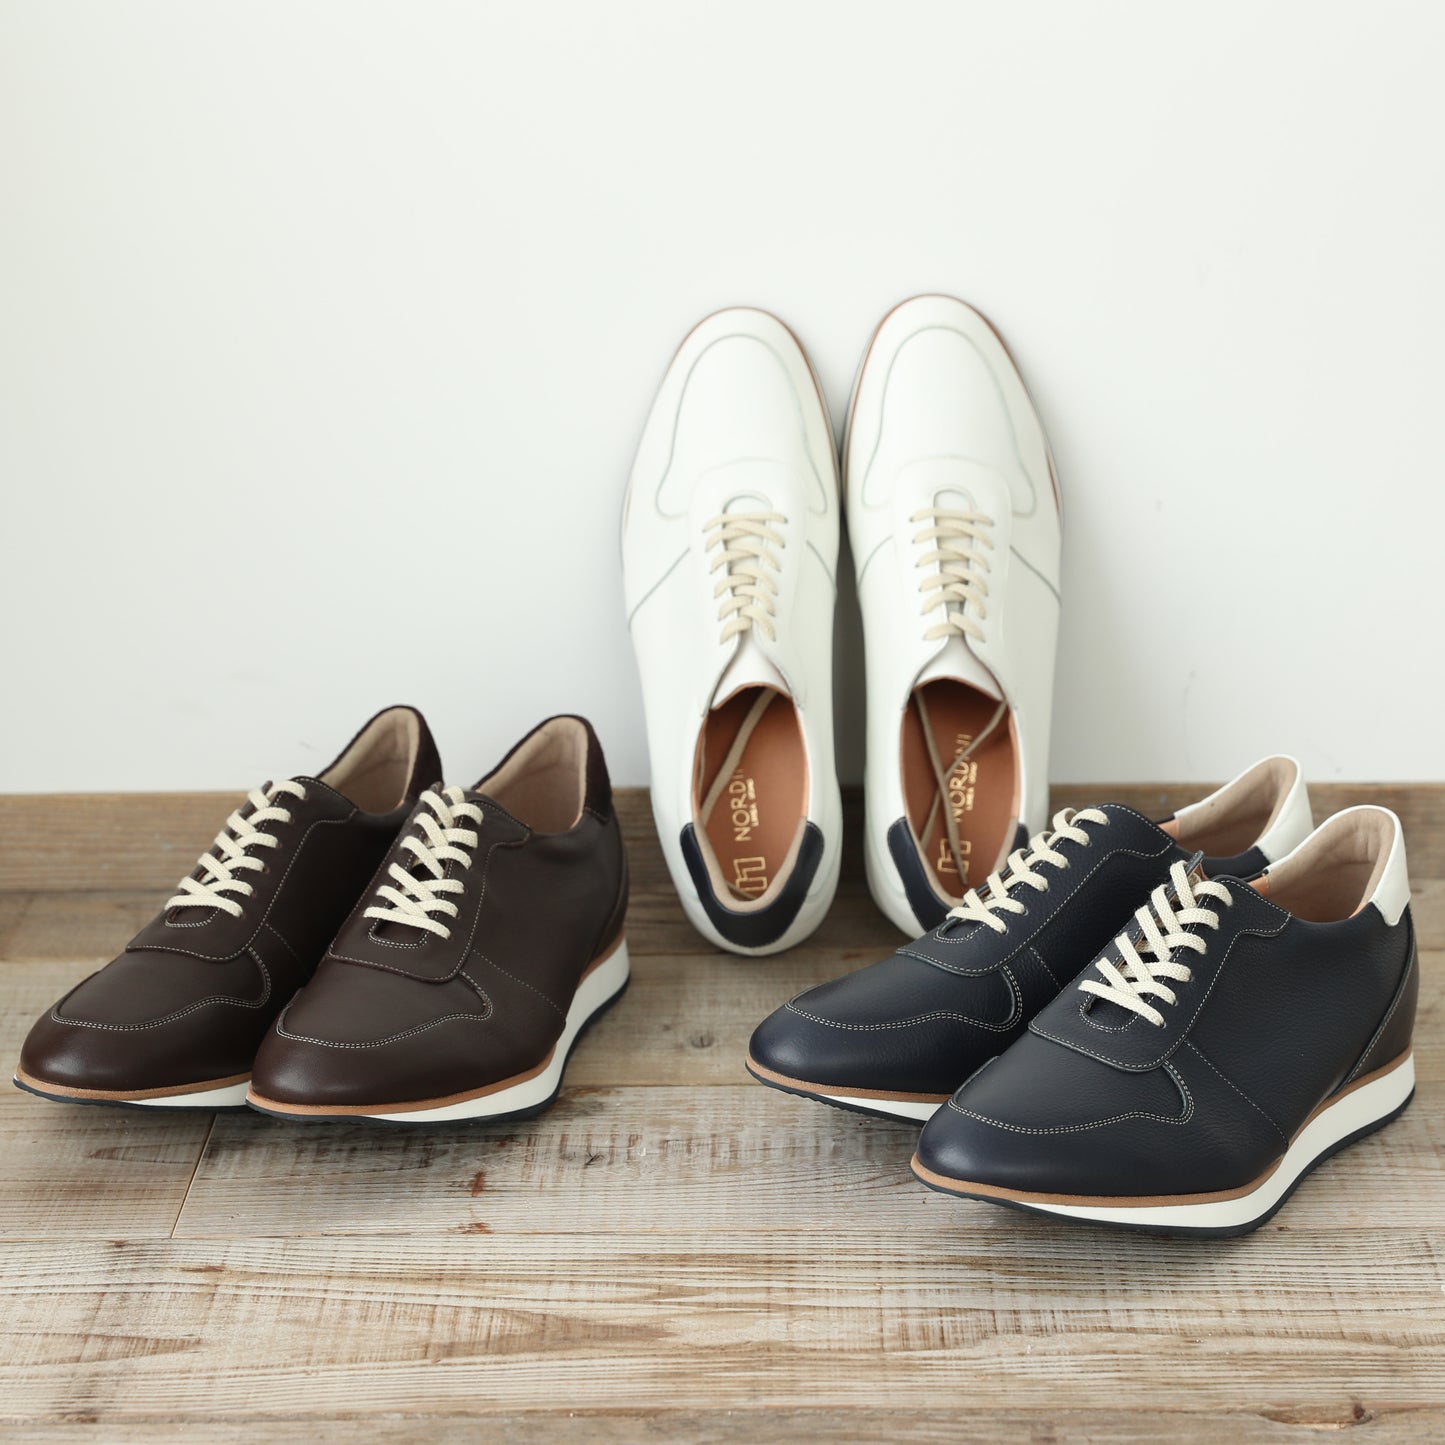 Men's Elevator Shoes Height Increasing 2" Taller Casual Shoes Genuine Leather Fashion Sneaker No. 801